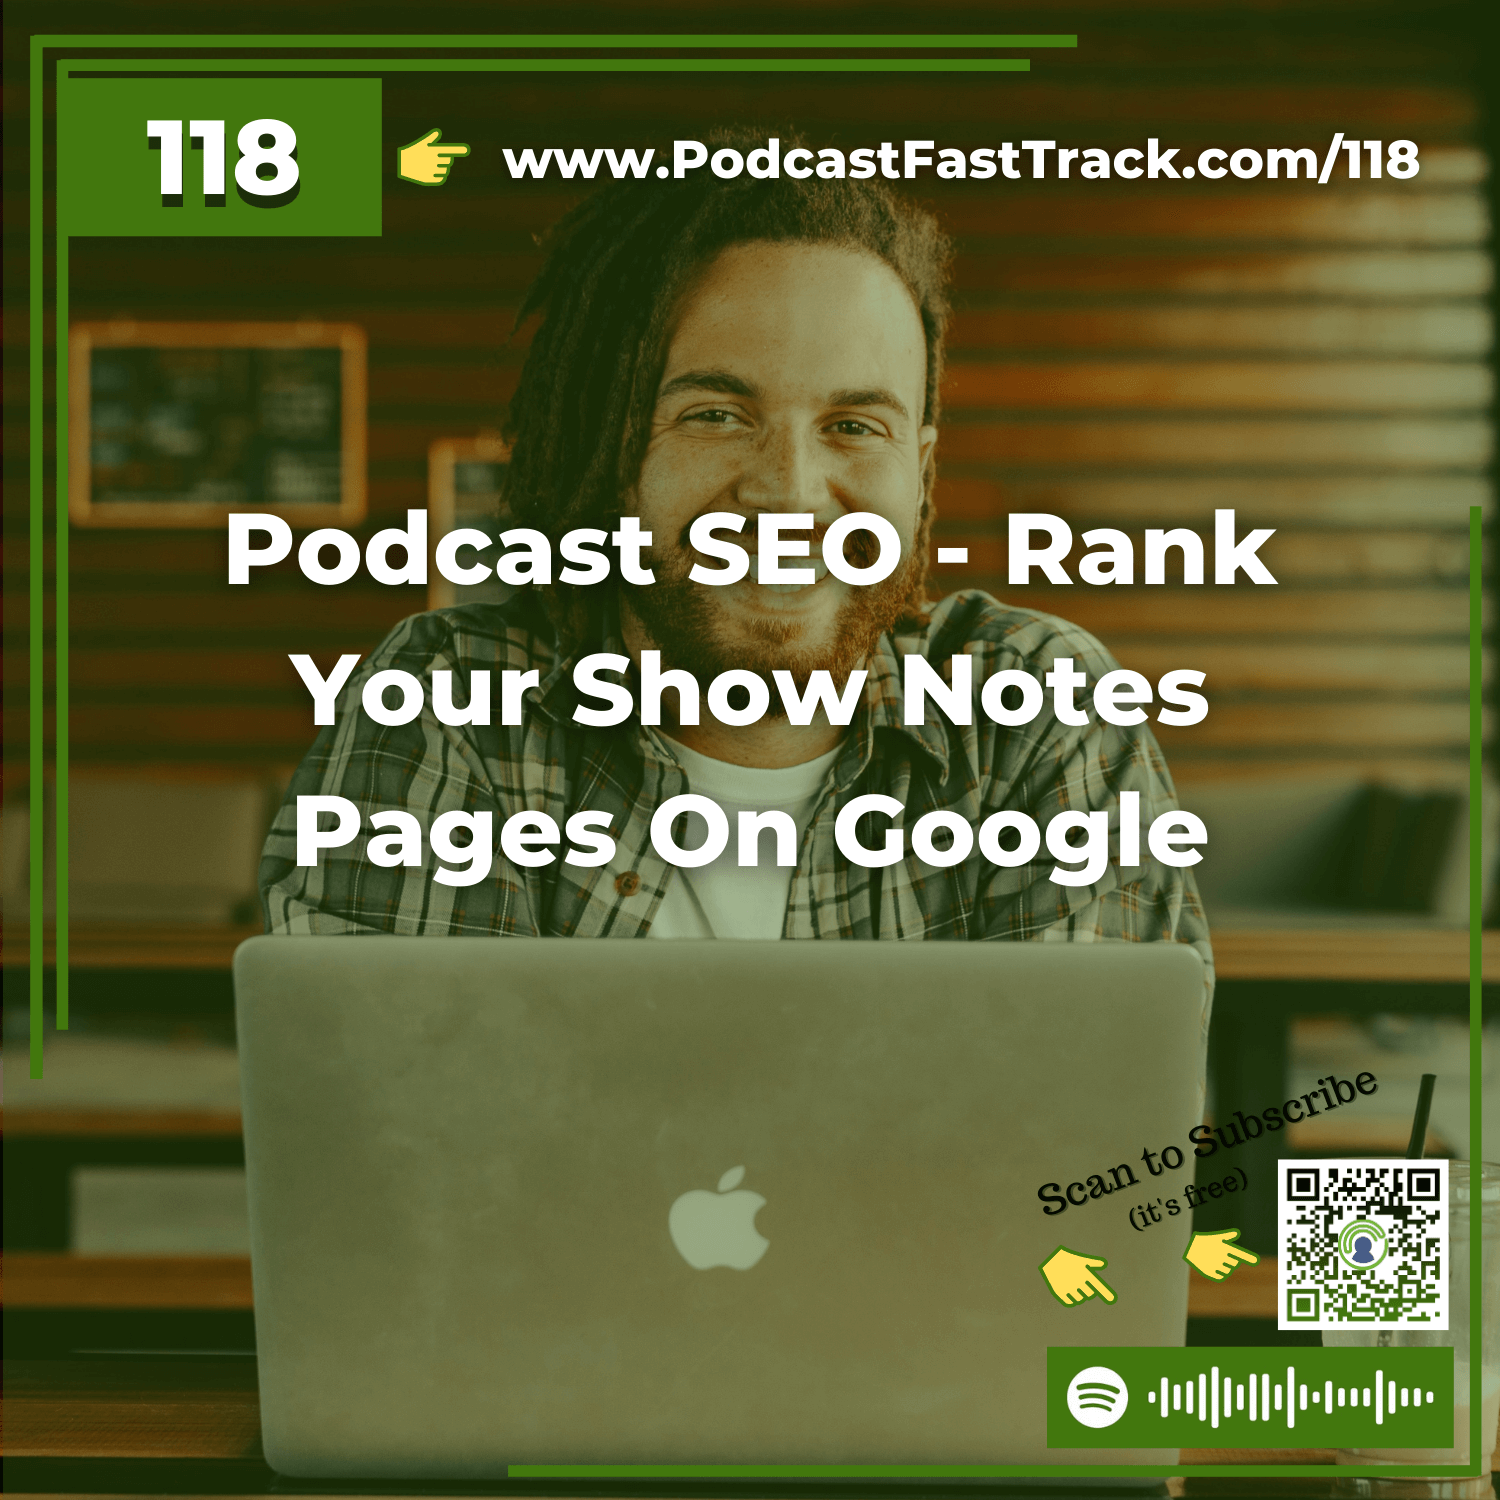 118: Podcast SEO – Rank Your Show Notes Pages On Google